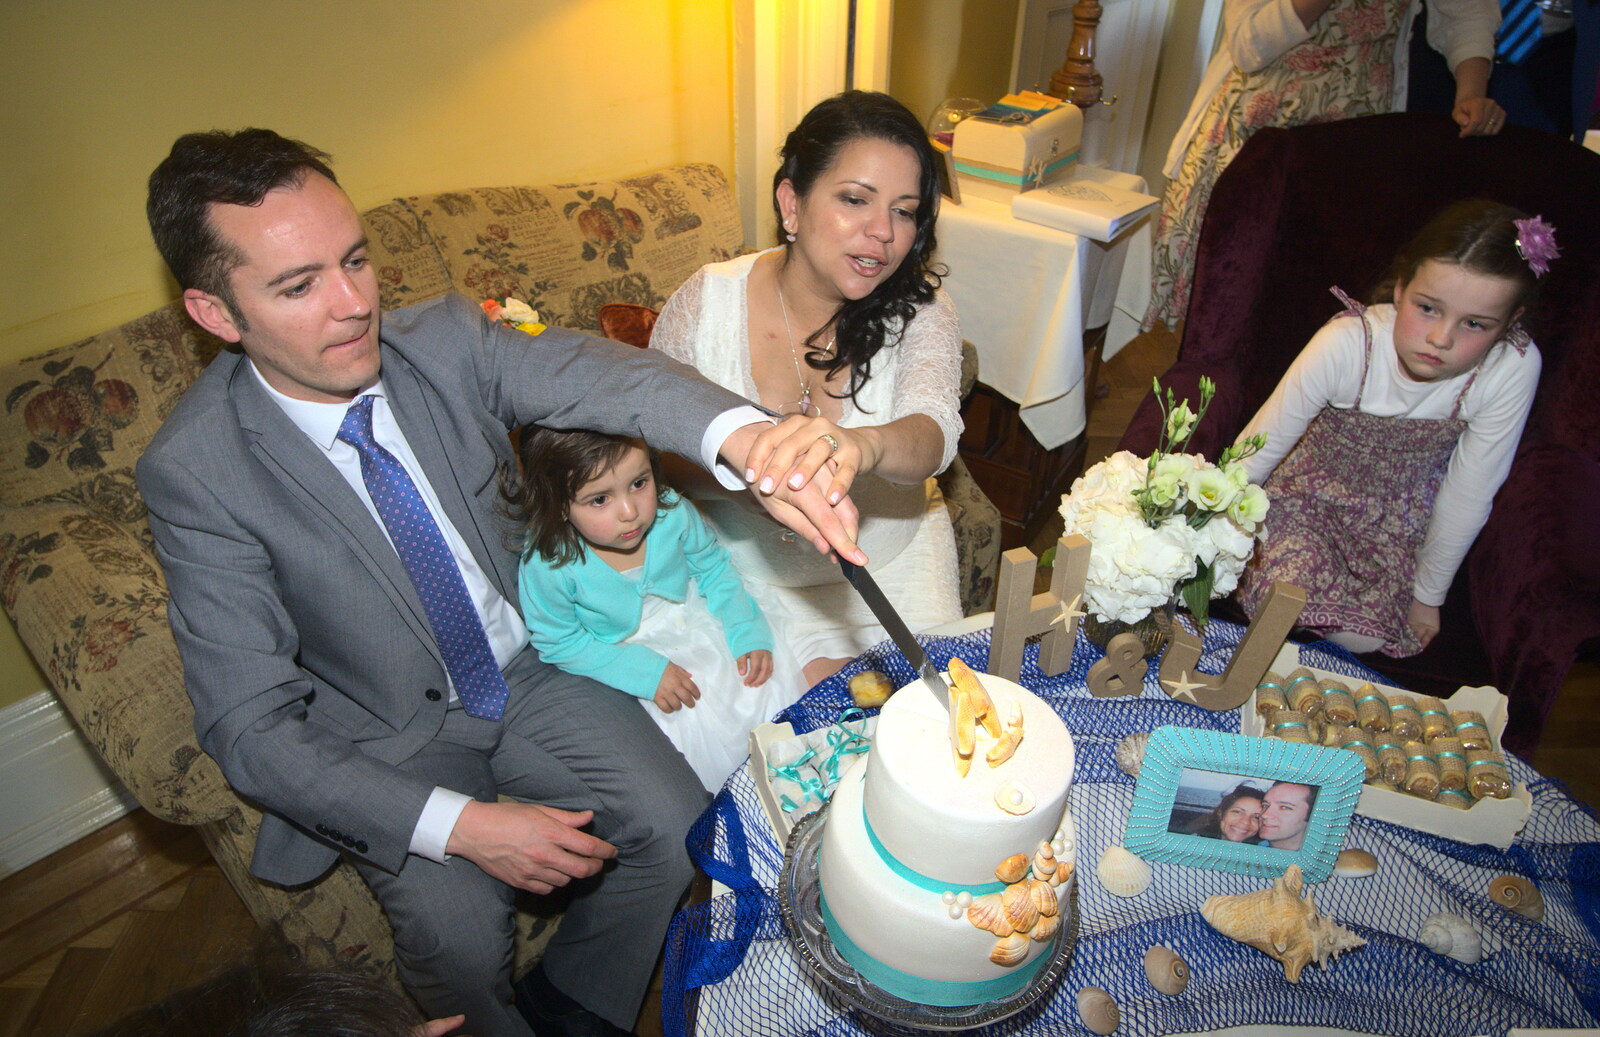 The cake is cut from James and Haryanna's Wedding, Grand Canal Dock, Dublin - 15th April 2015